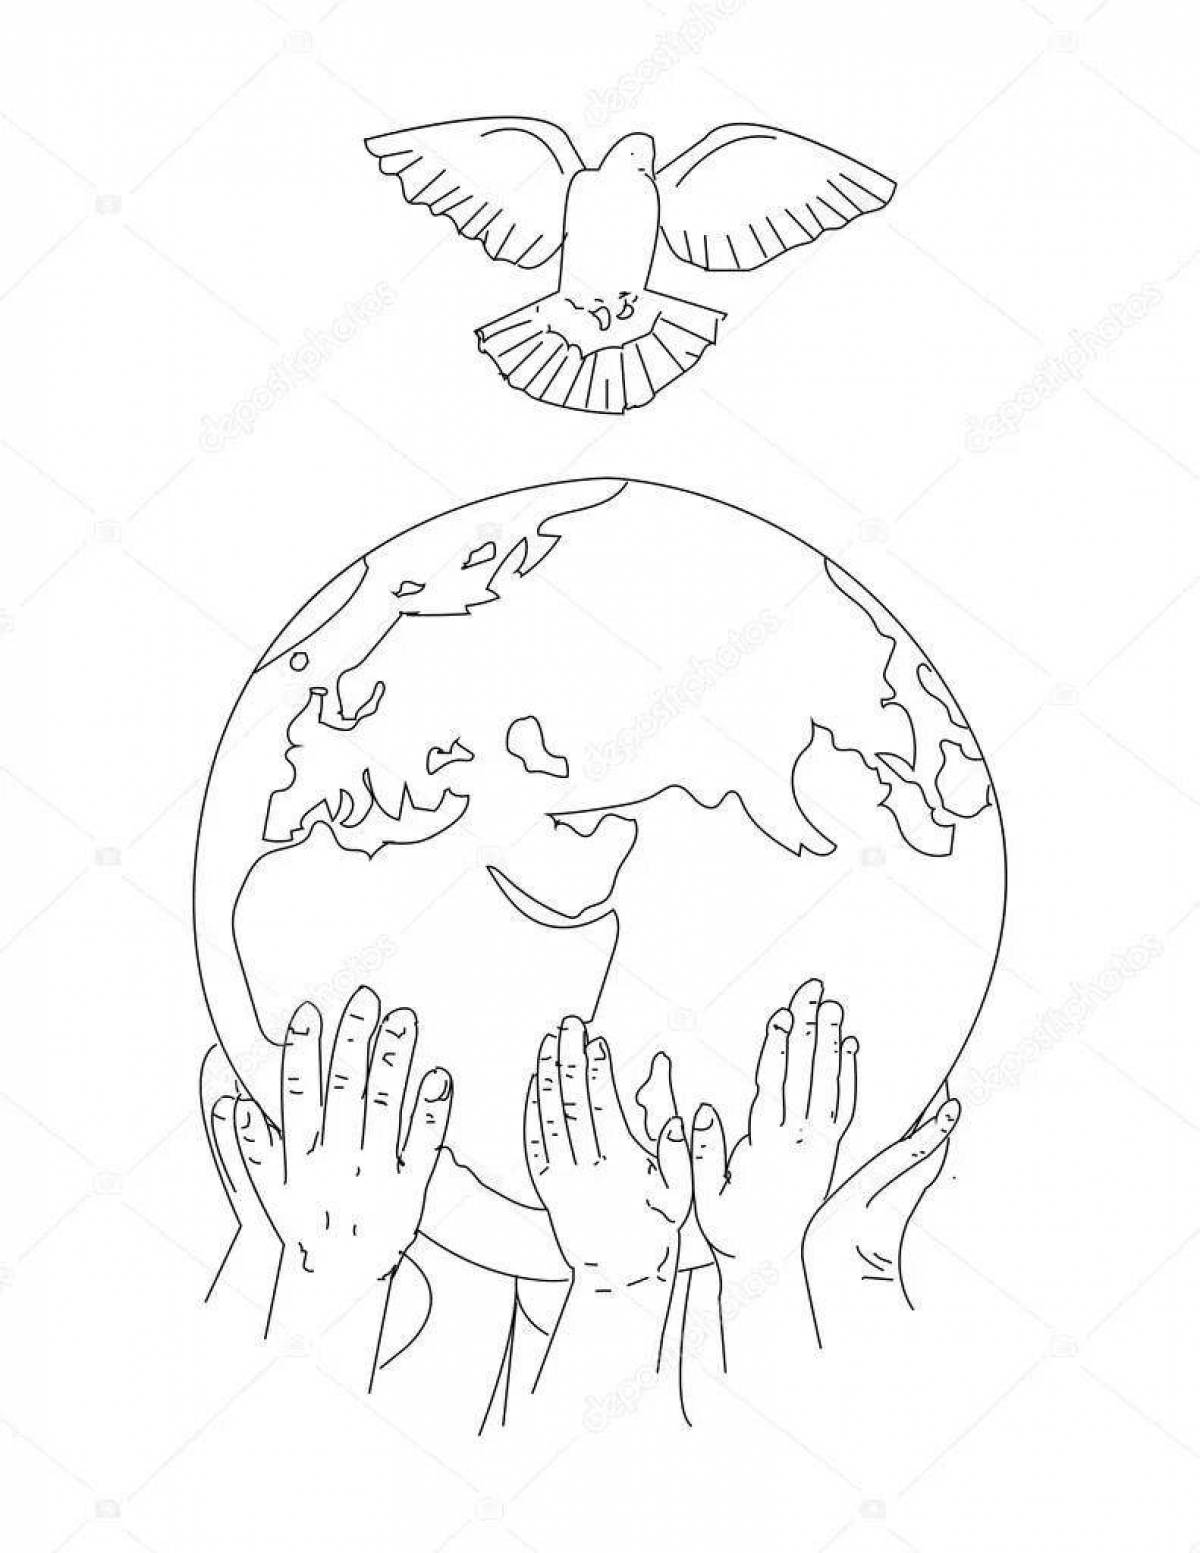 Coloring page glorious world without war